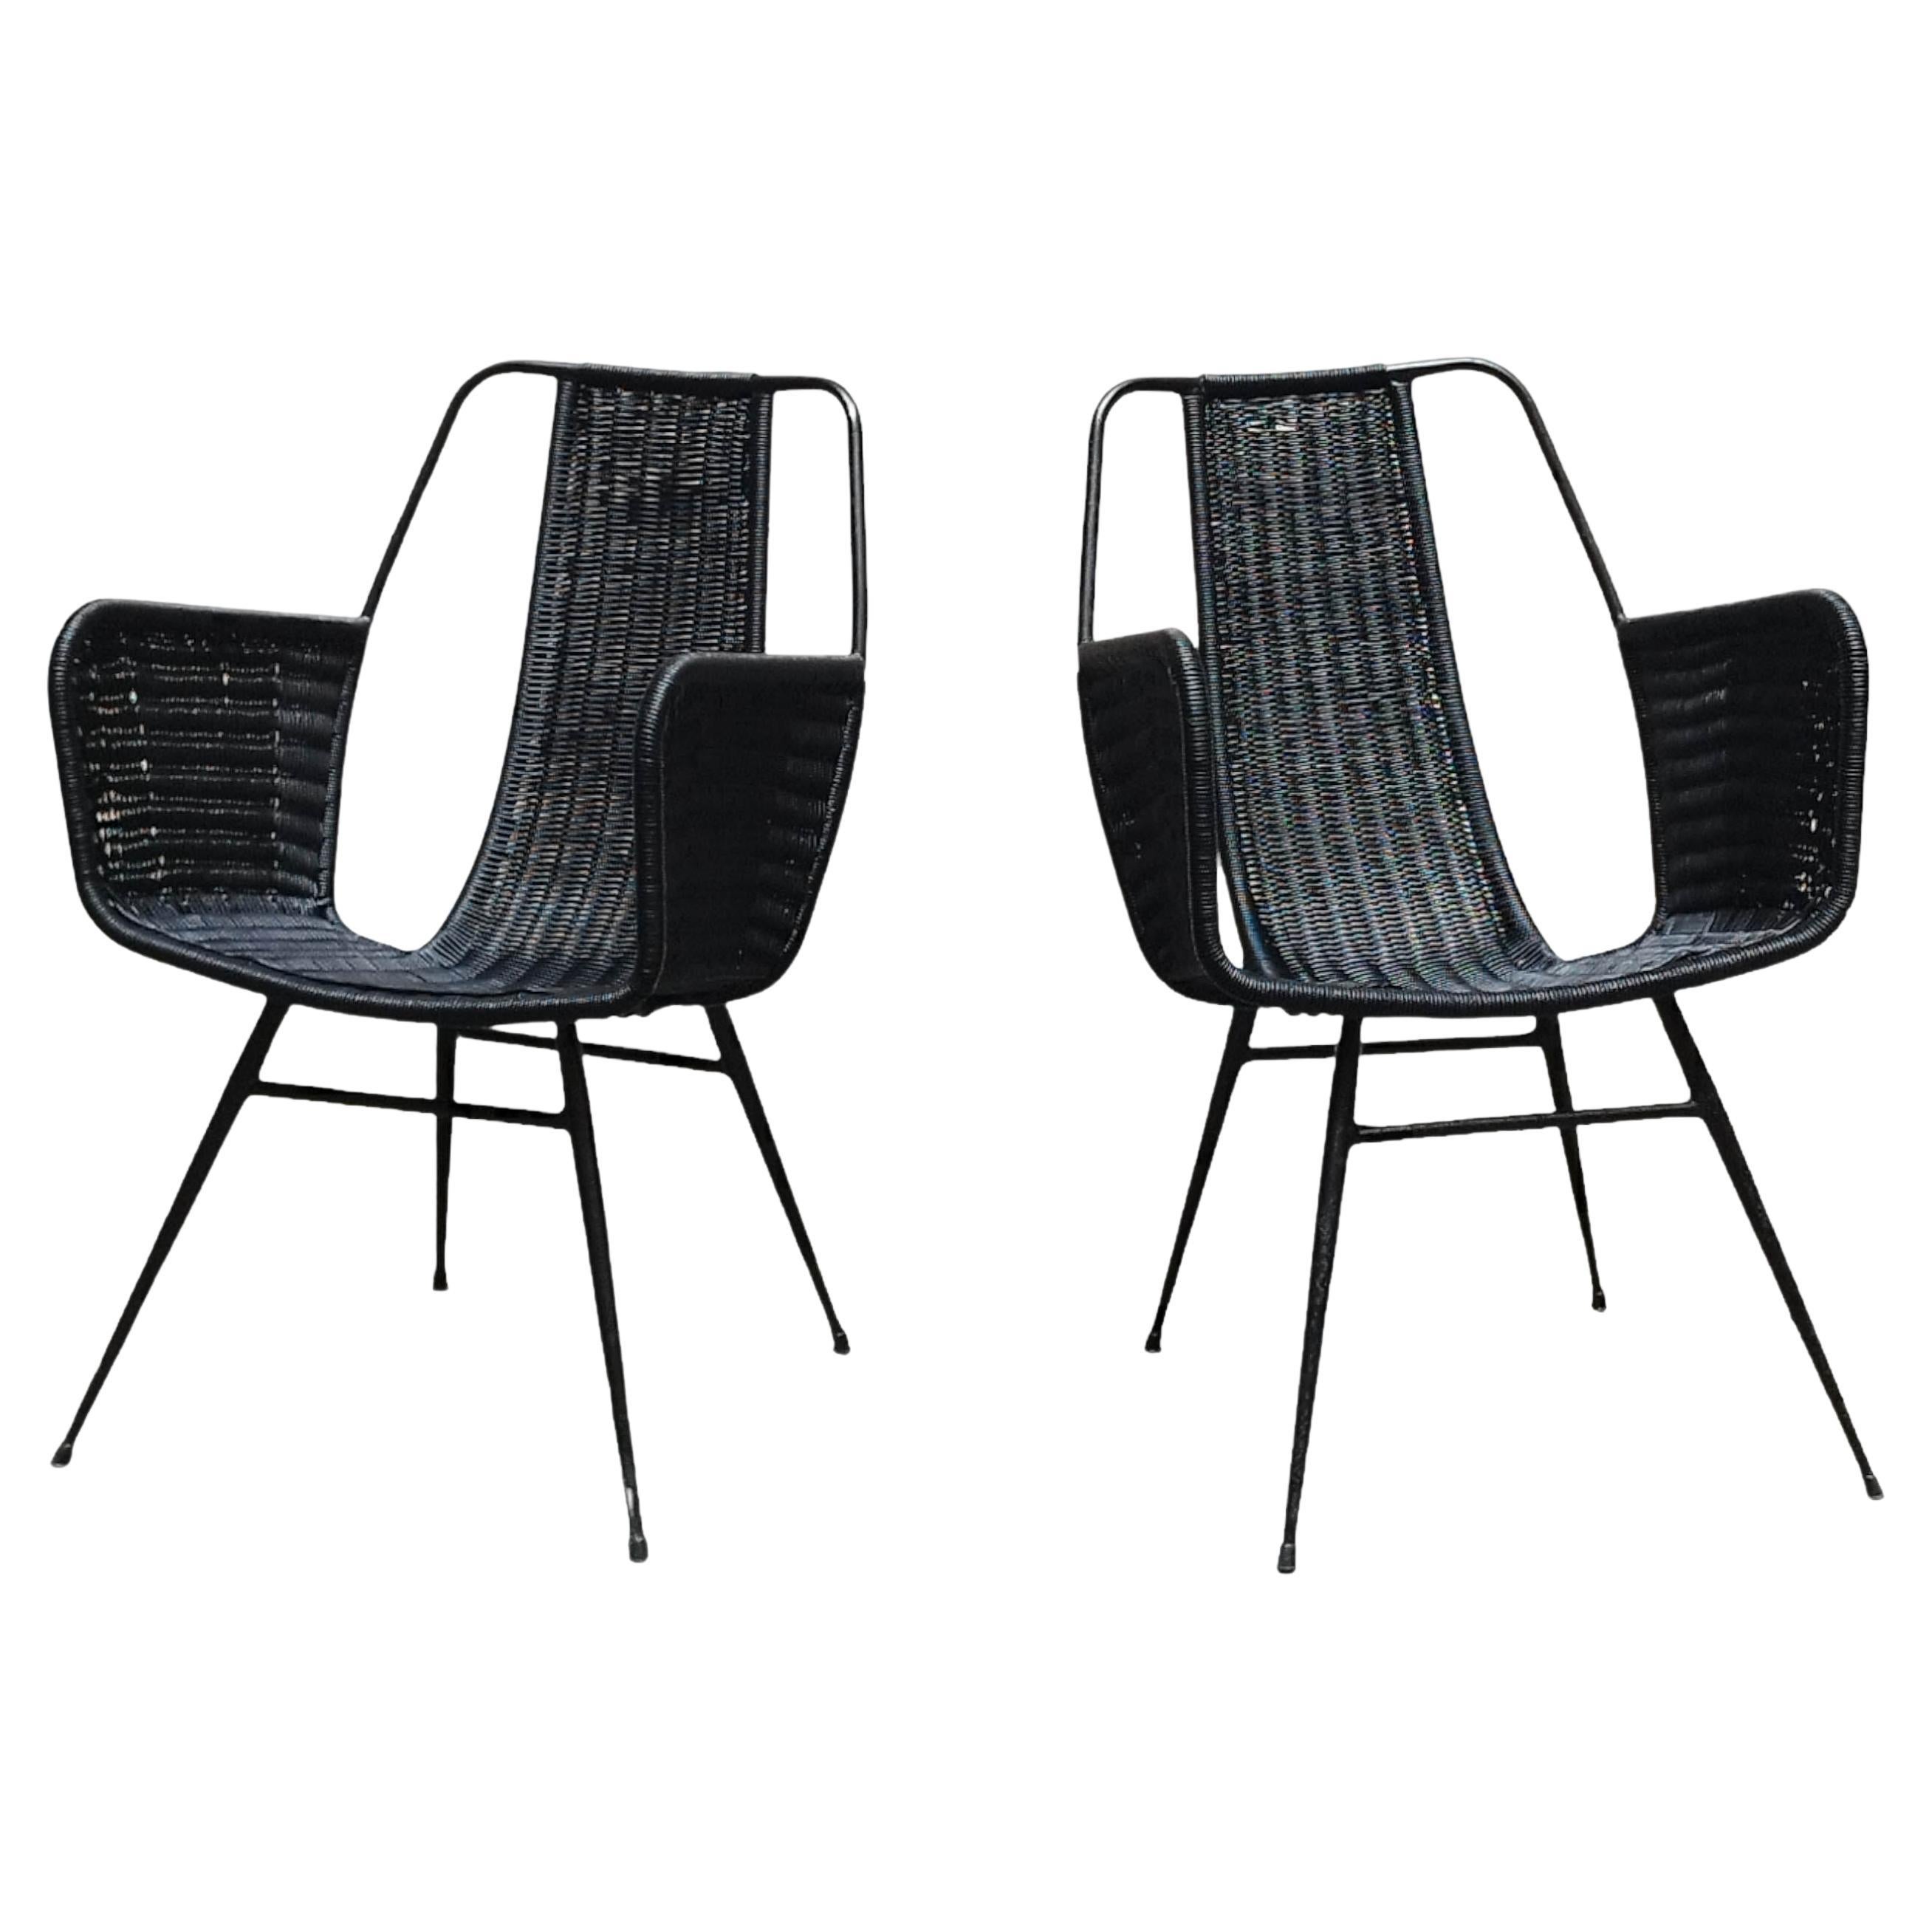 Gastone Rinaldi, Pair of Outdoor Armchairs in Woven Plastic, Italy 1960s/70s For Sale